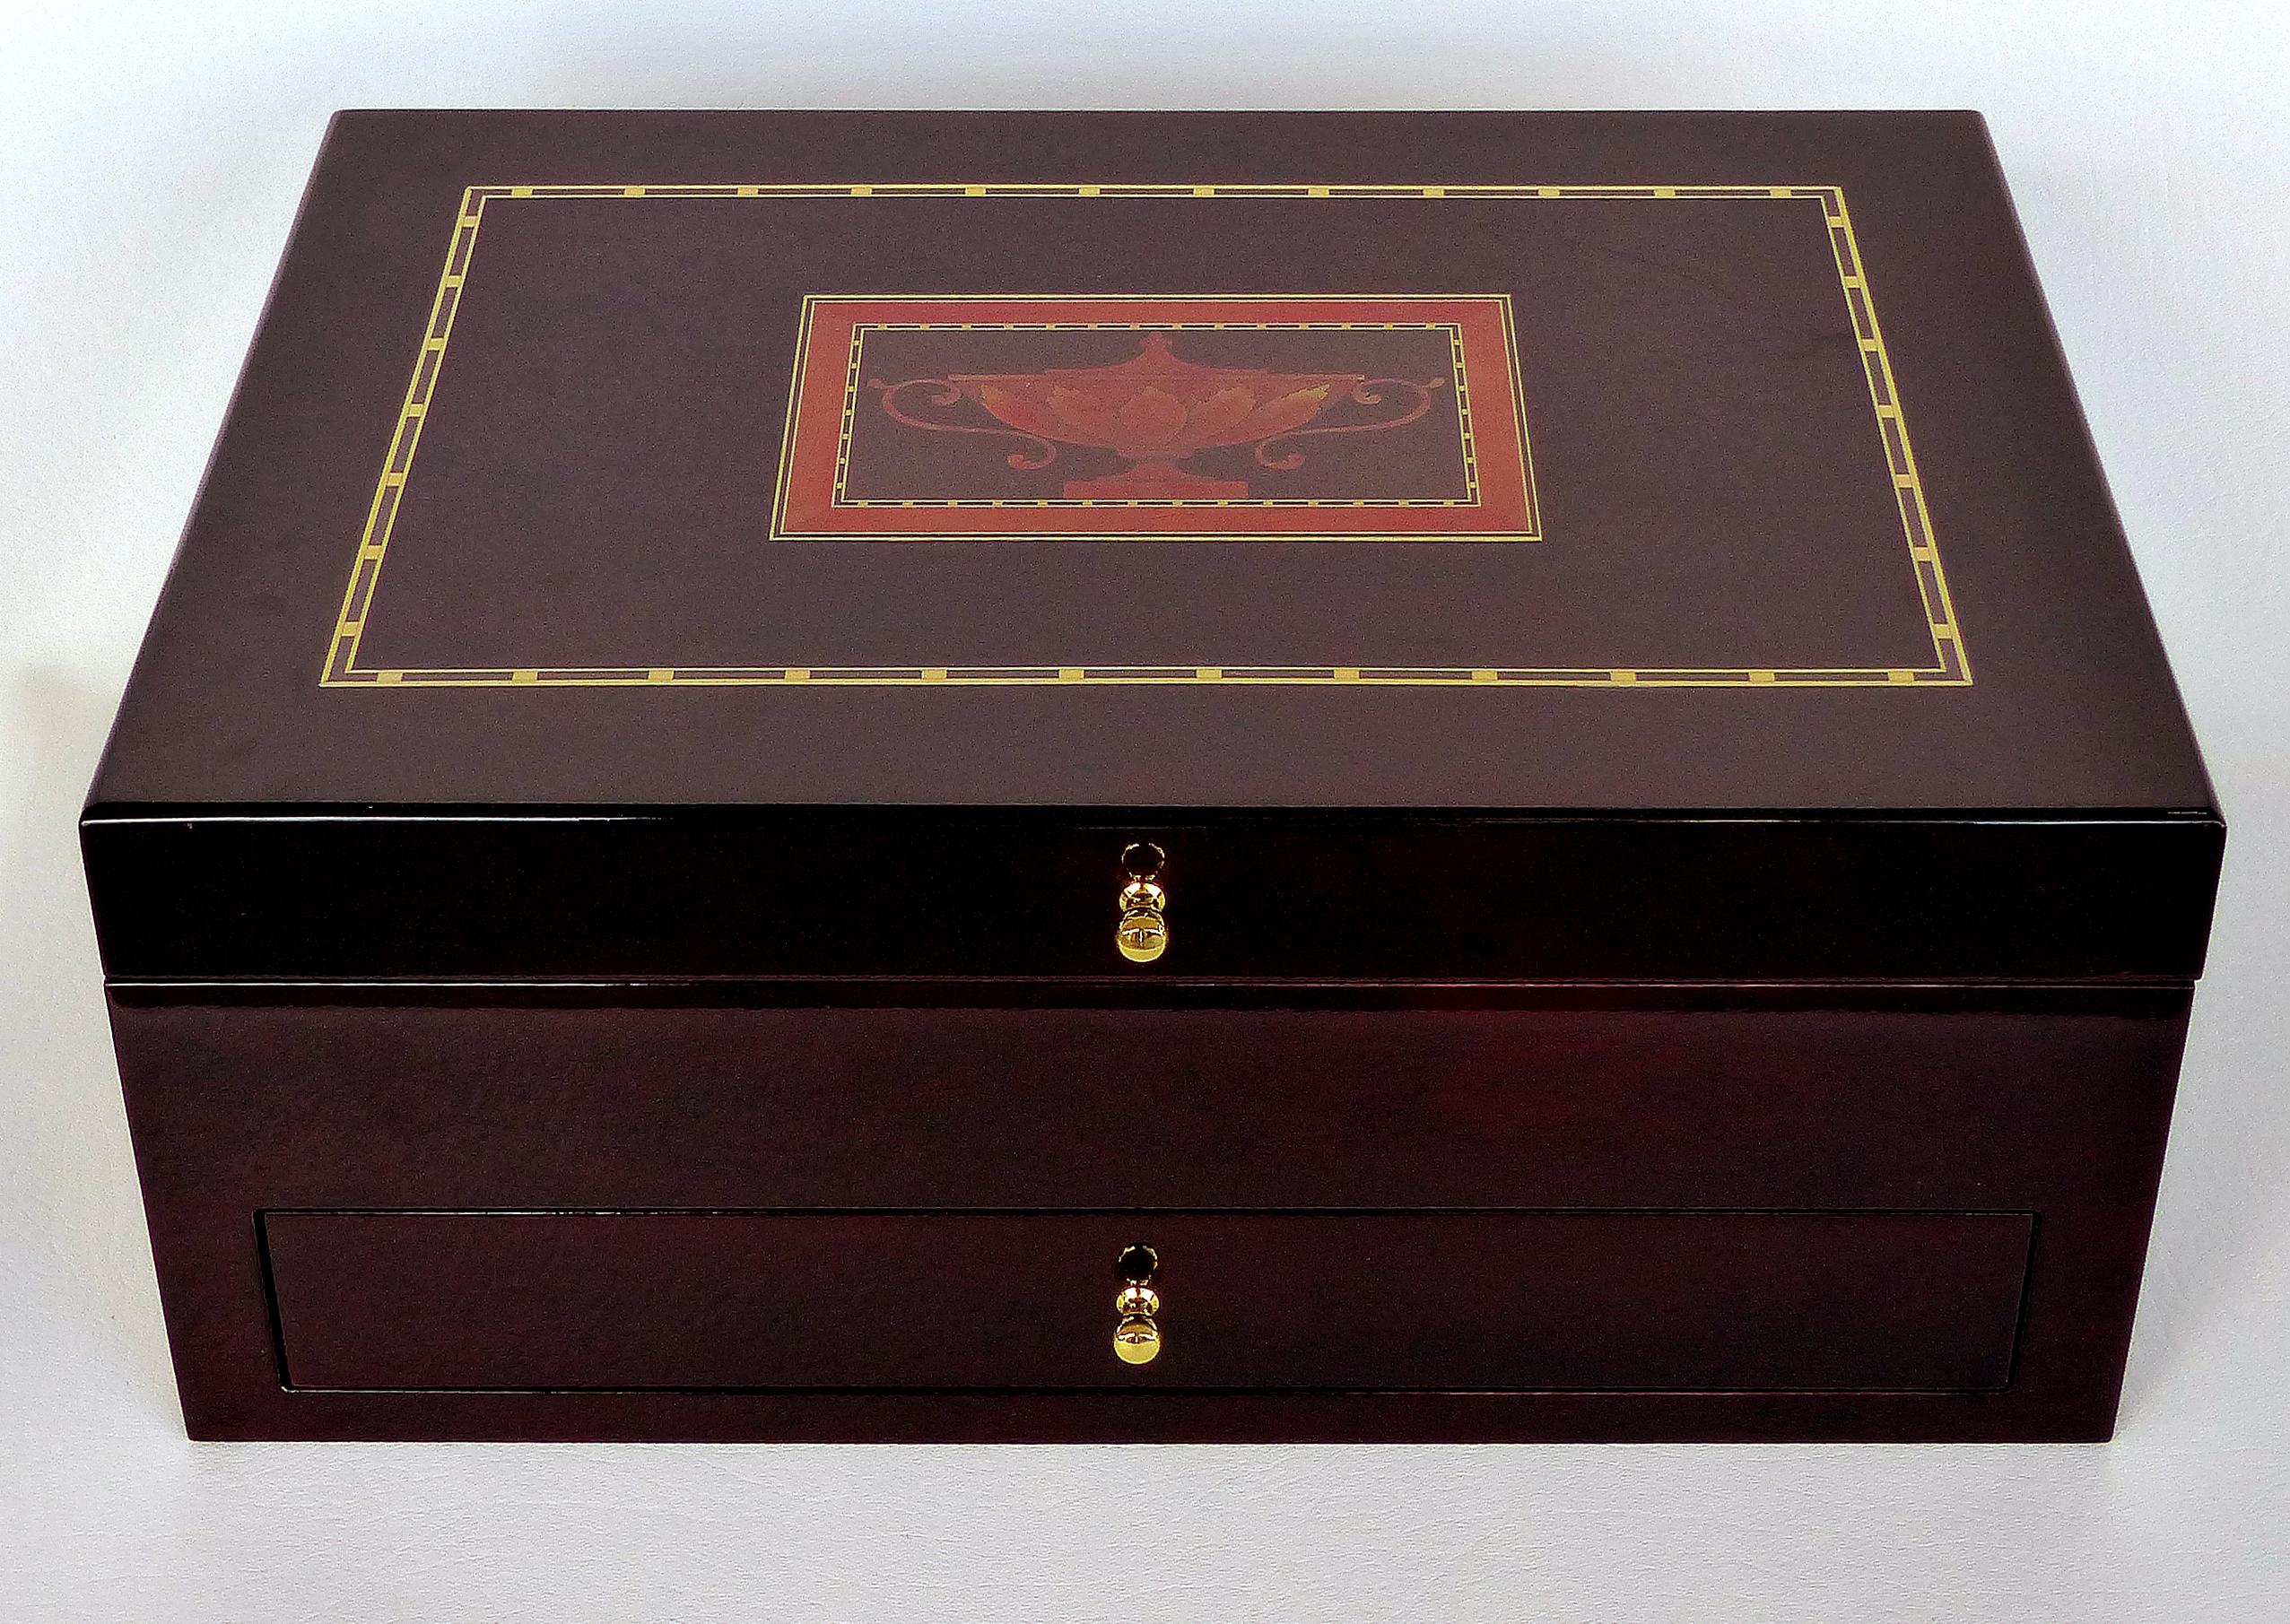 Offered for sale is a Reed & Barton lined silver chest with marquetry details in the American 18th century style.